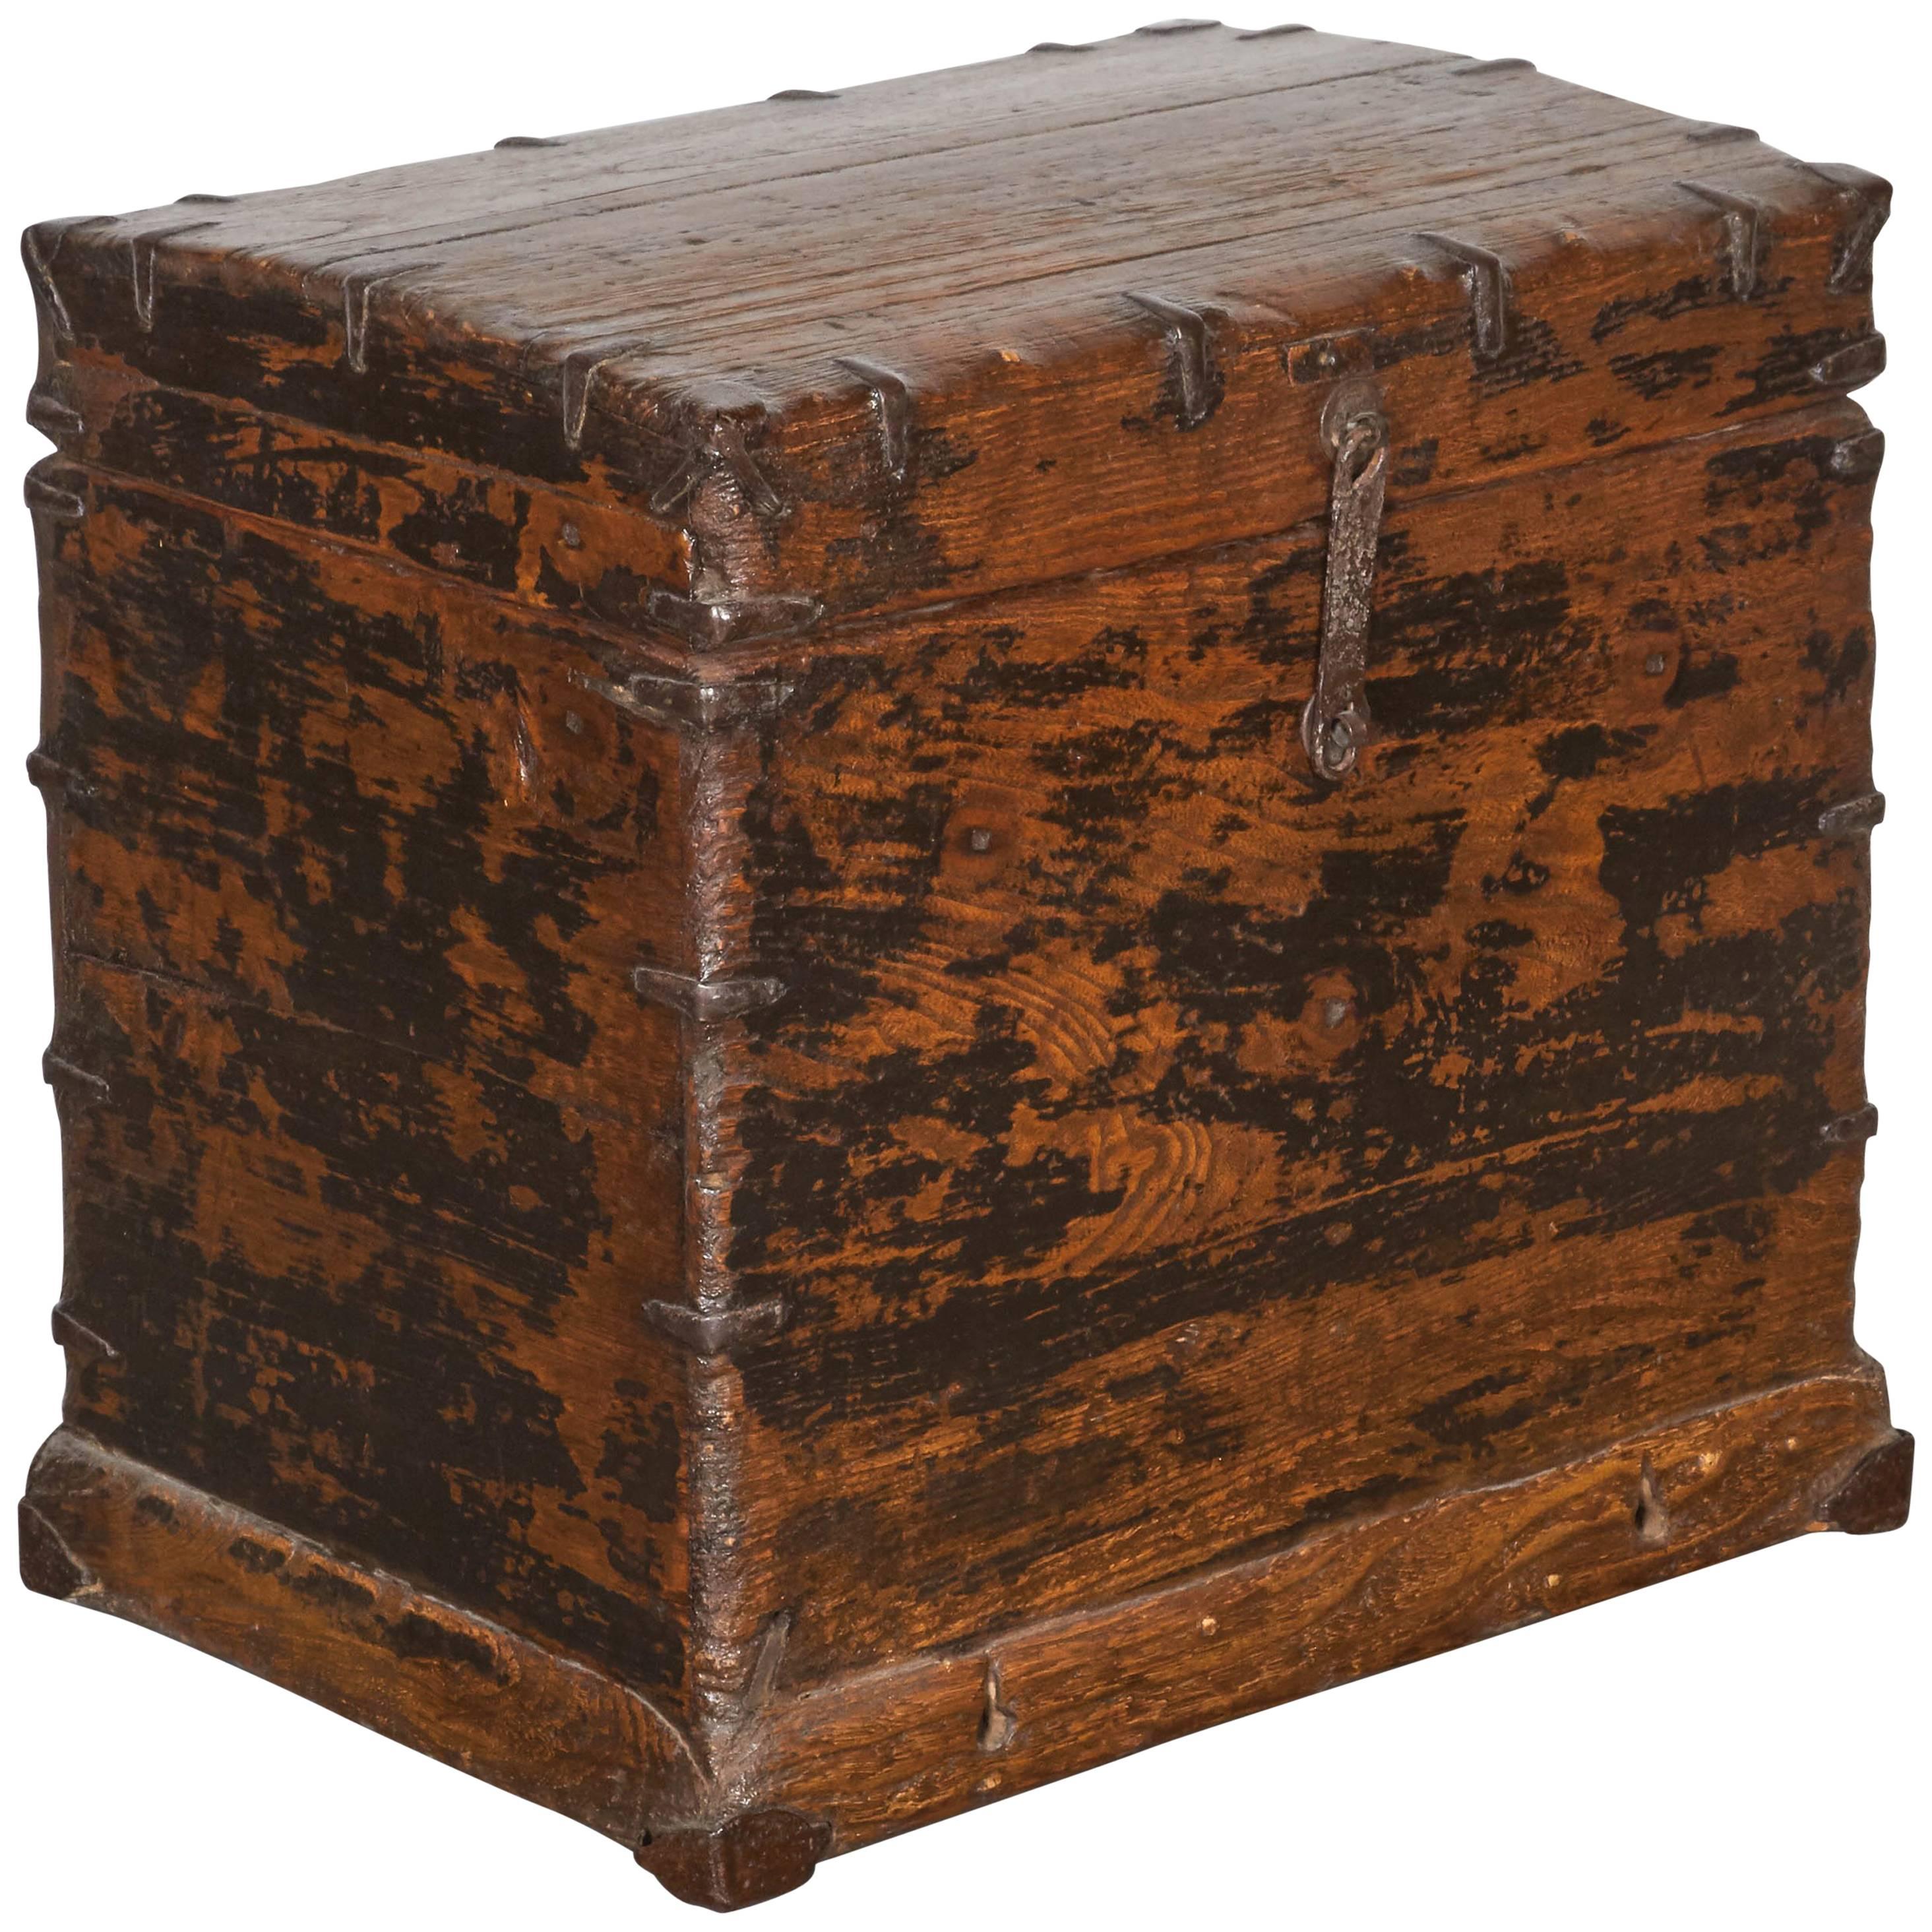 Perfectly Worn Antique Chest with Original Iron Fittings